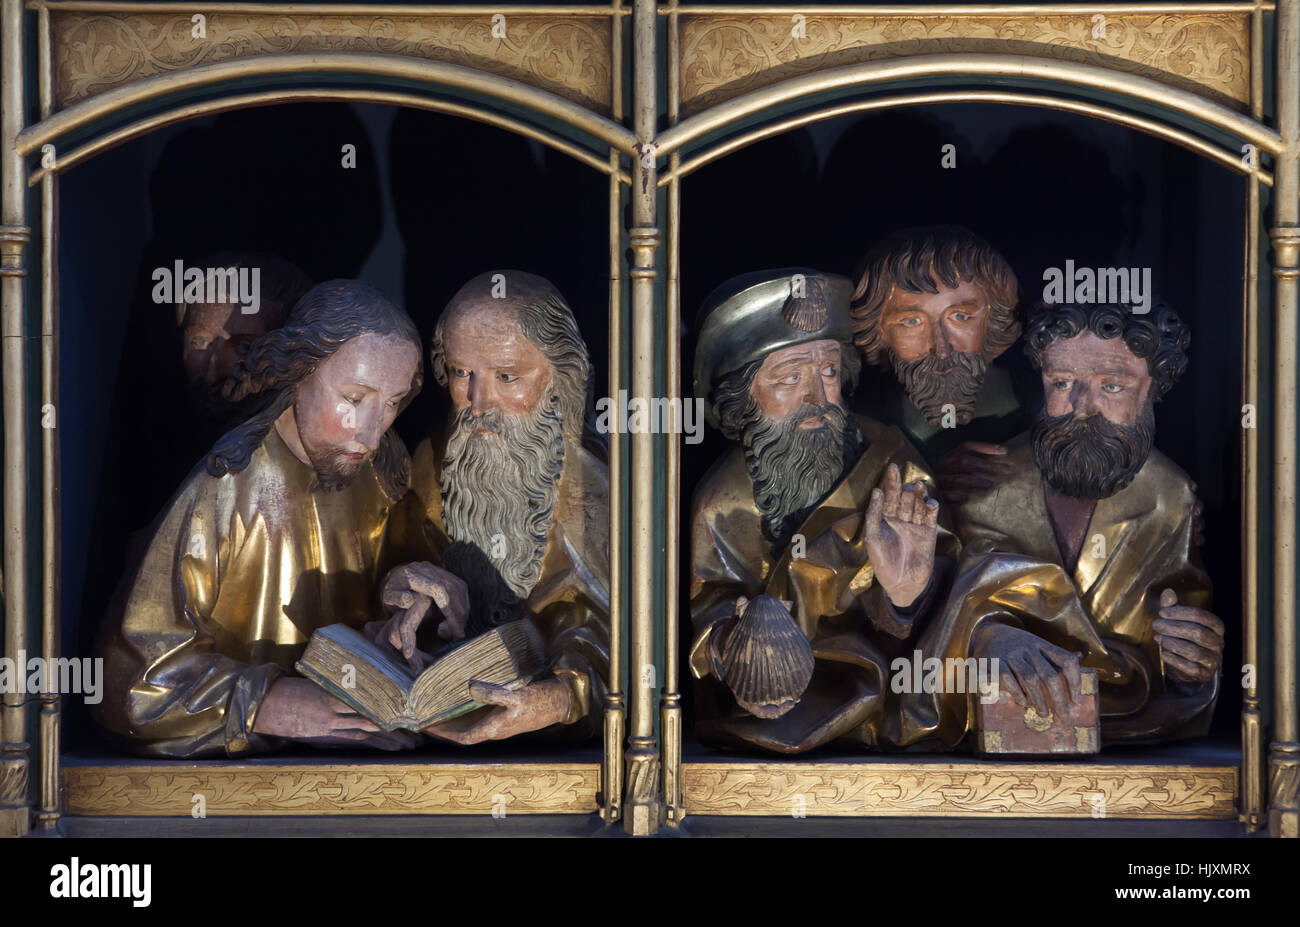 Six apostles attributed to German late gothic sculptor Nikolaus Hagenauer. Wooden statues in the predella of the Isenheim Altarpiece displayed in the Musee d'Unterlinden (Unterlinden Museum) in Colmar, Alsace, France. Stock Photo